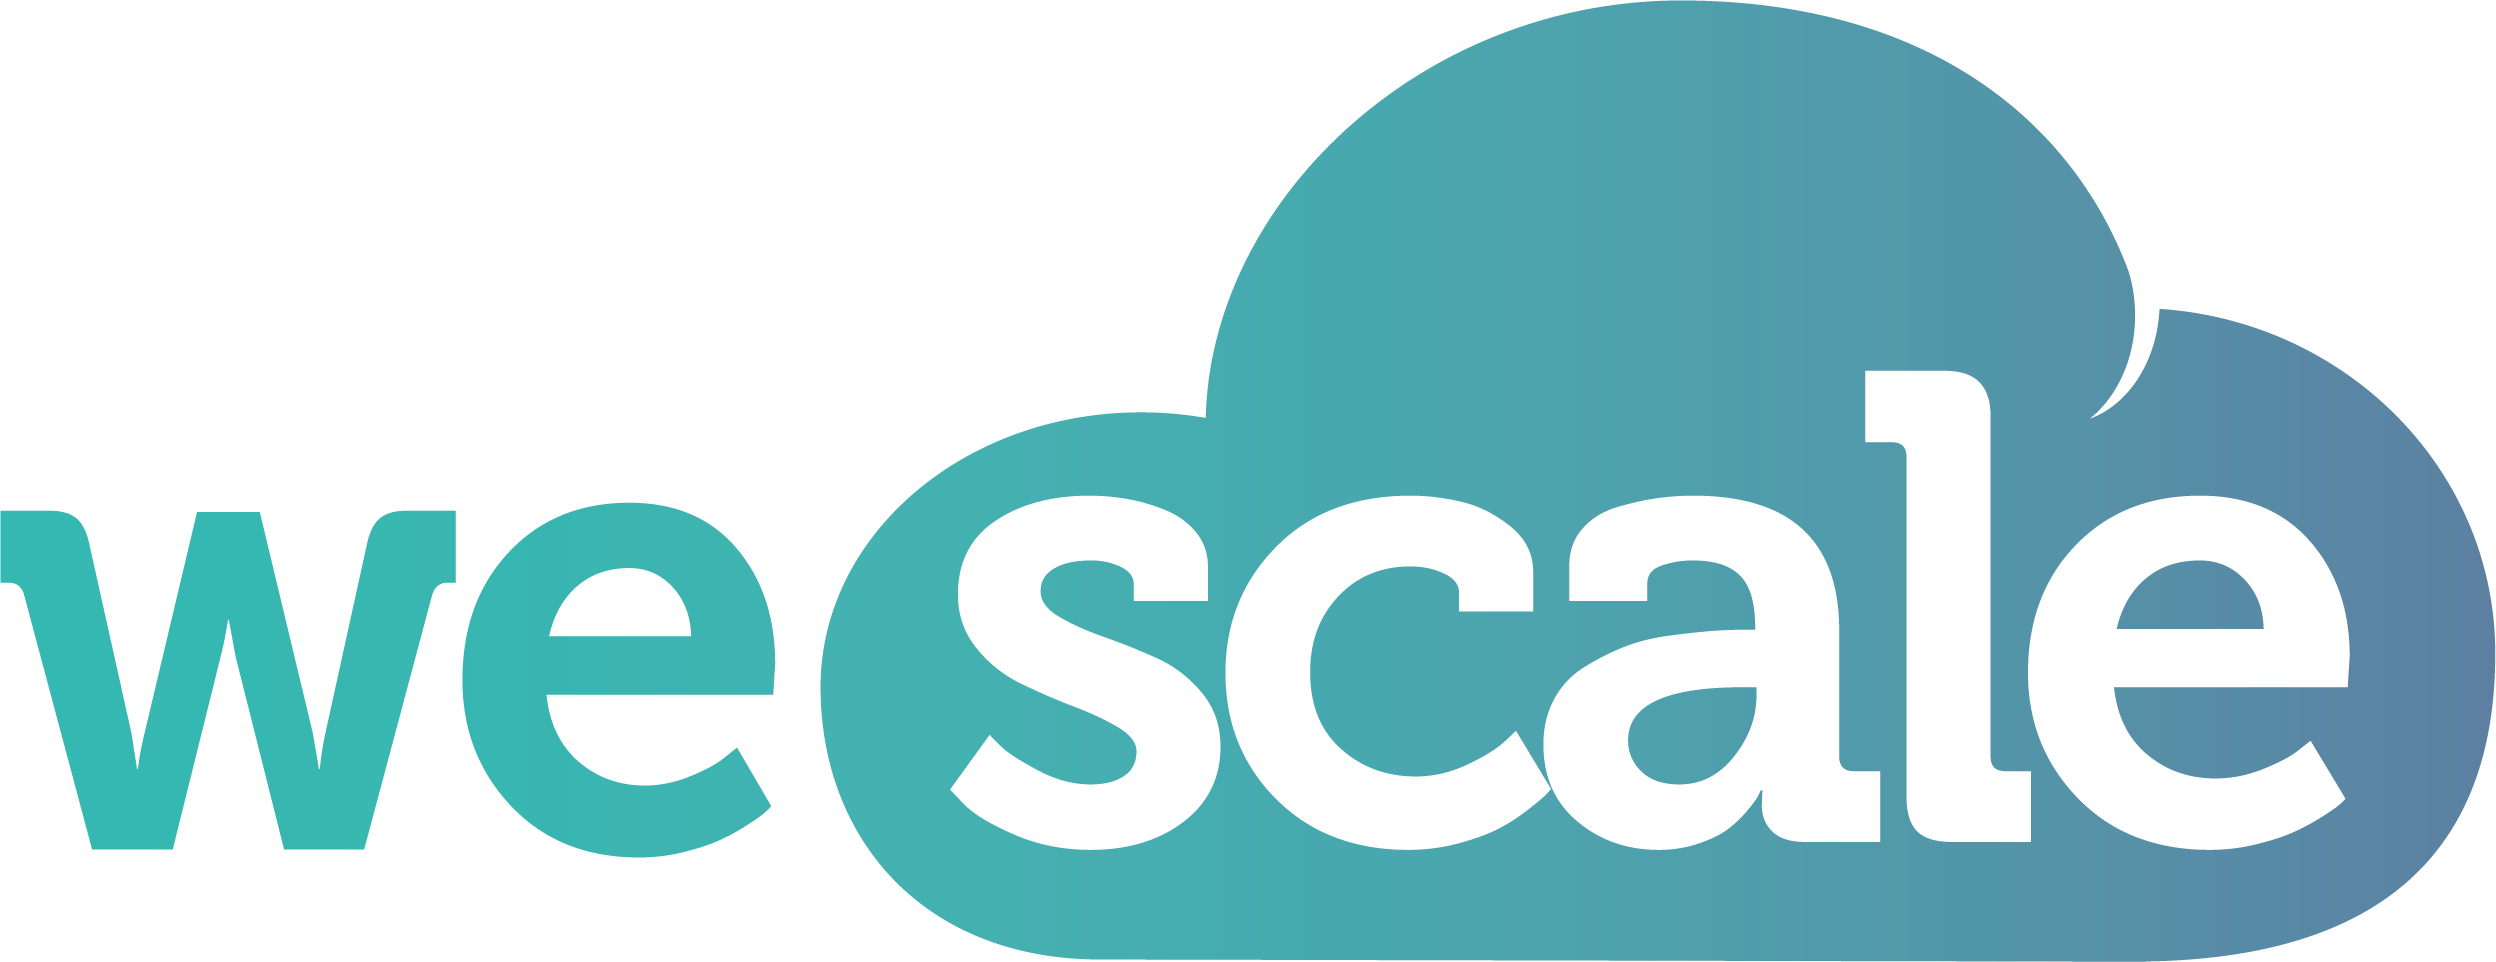 WESCALE